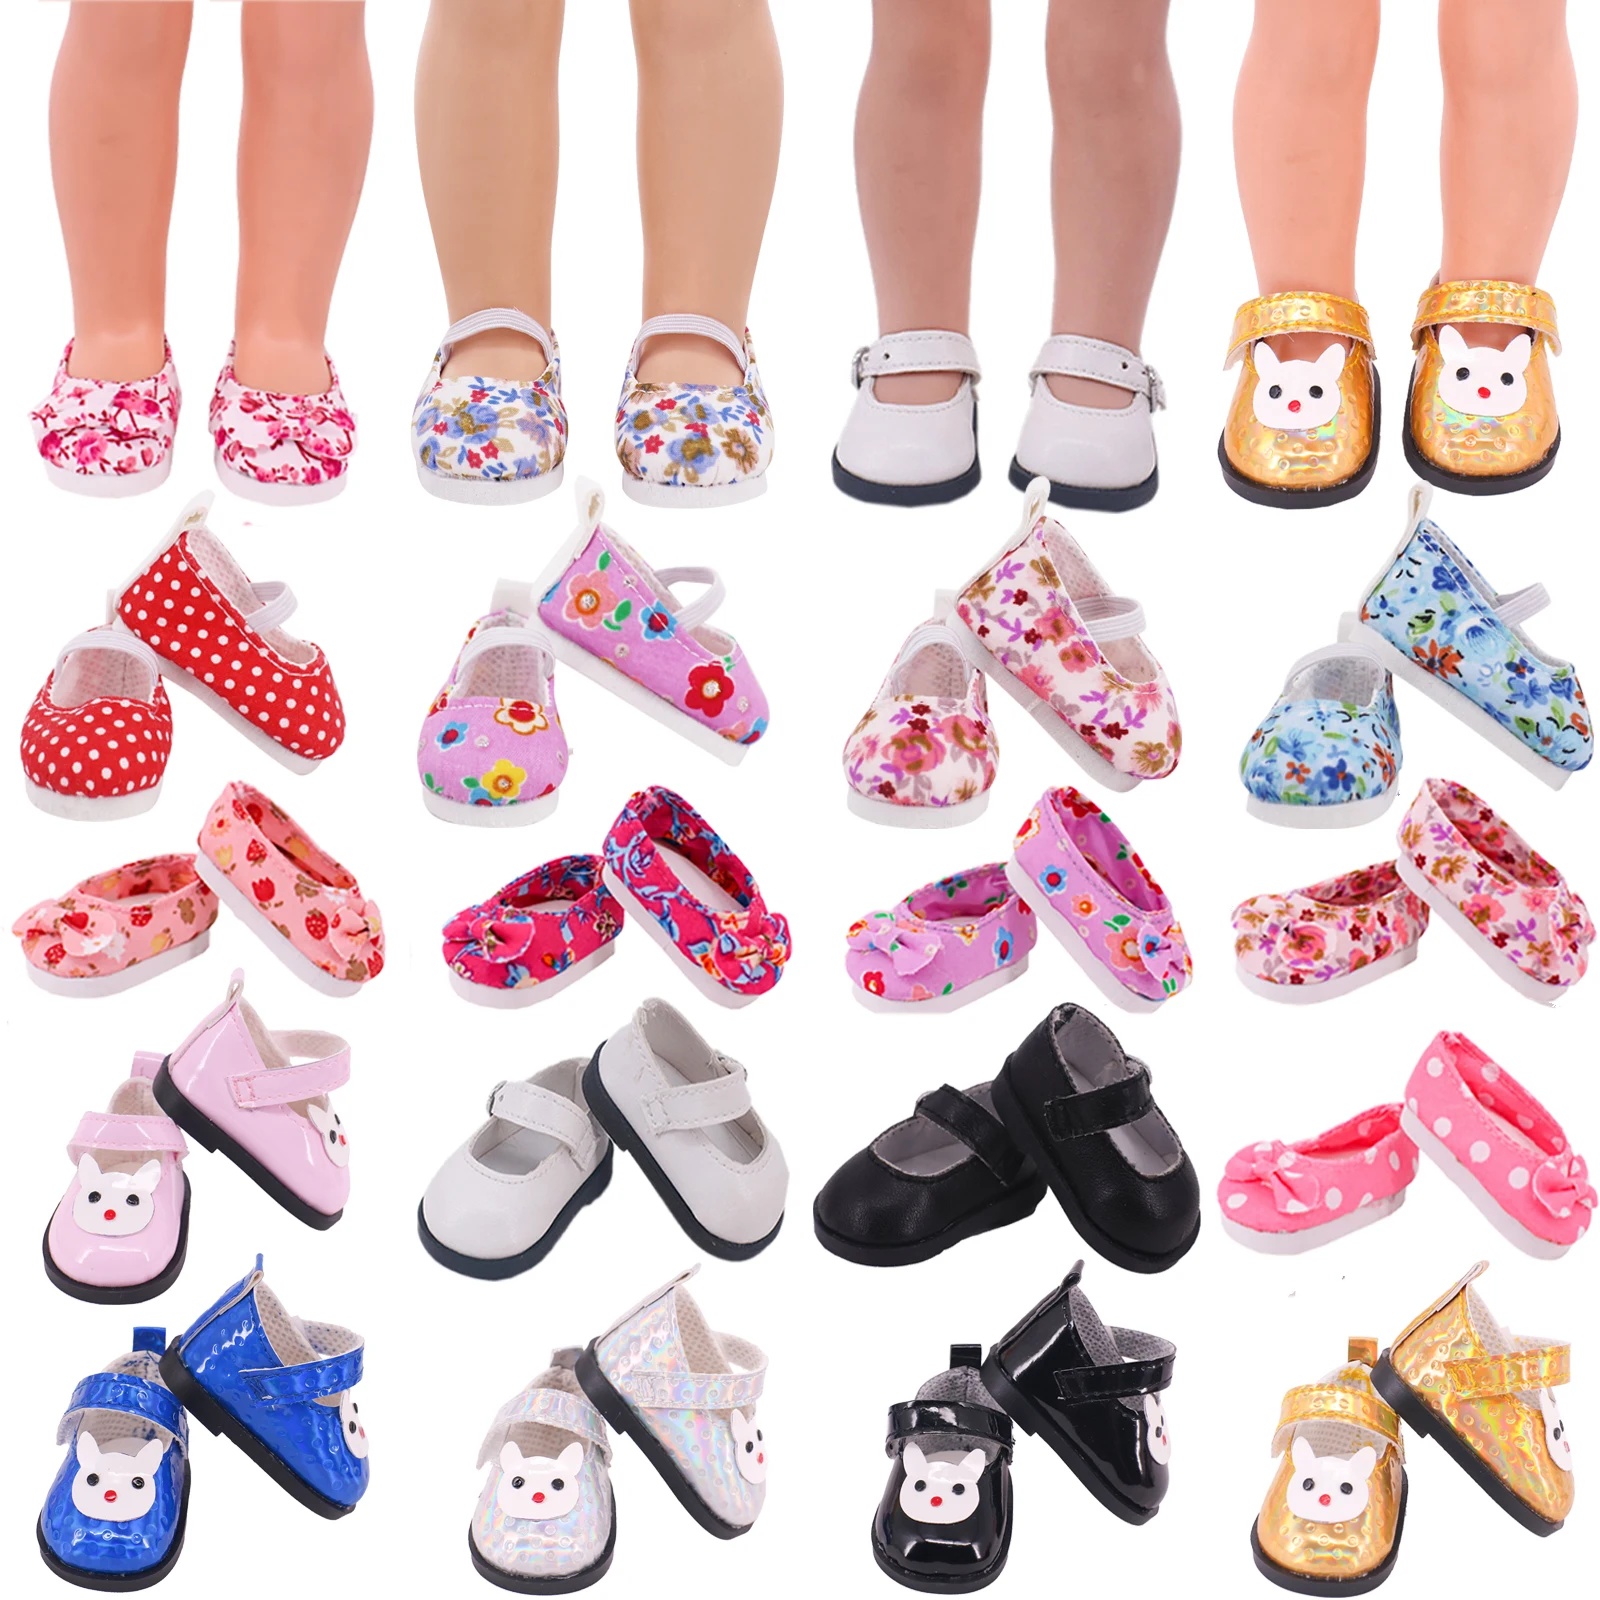 Cute 5Cm Doll Shoes Paola Reina Wellie Wisher Floral&Pu Shoes For 14.5 Inch Doll&EXO&Blythe Doll Accessories Girl DIY Toys